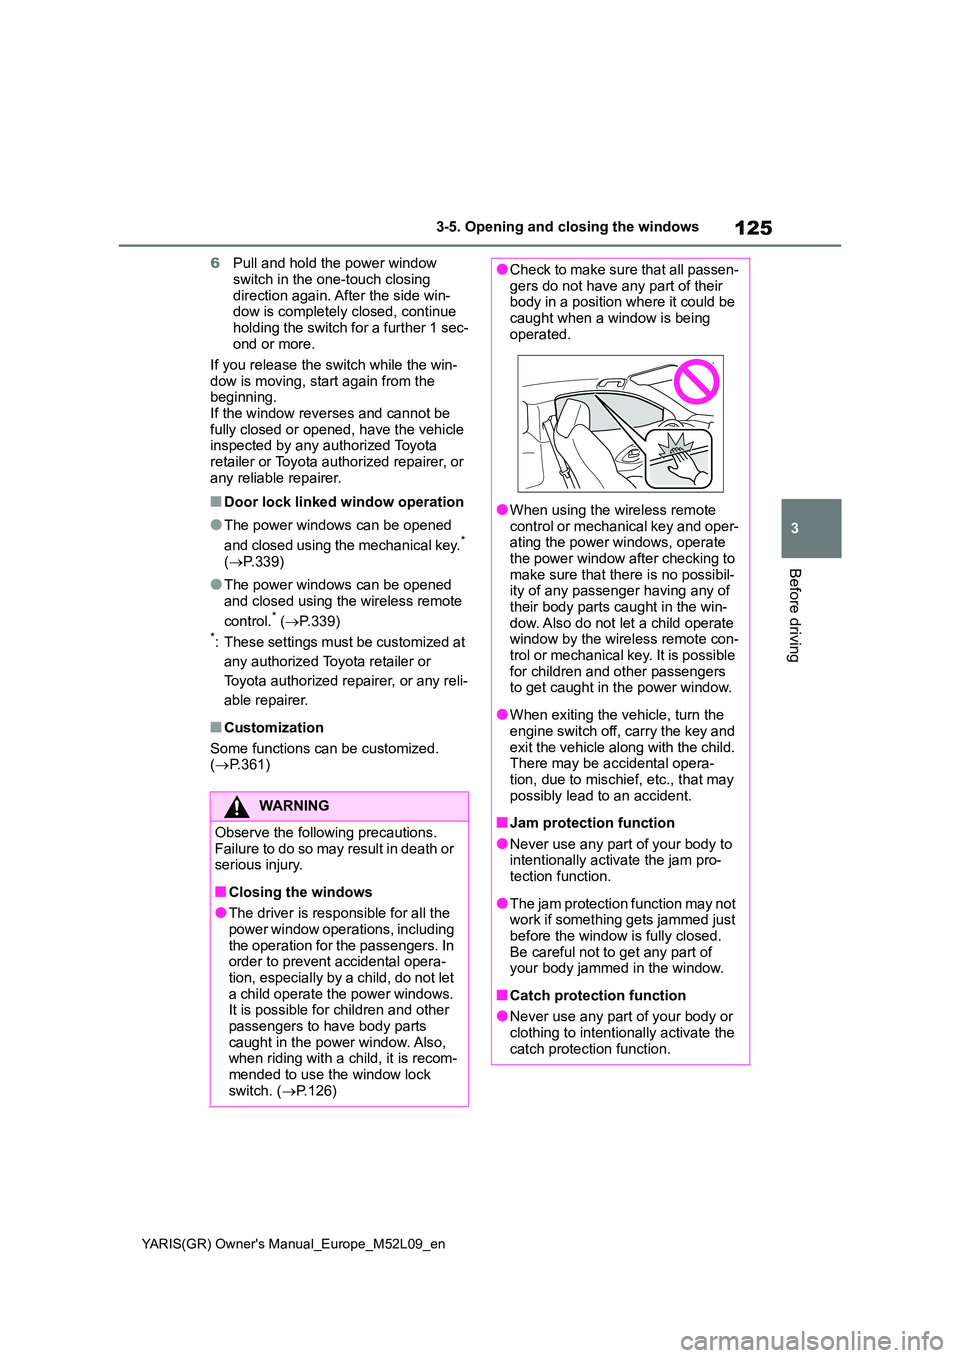 TOYOTA GR YARIS 2020  Owners Manual 125
3
YARIS(GR) Owners Manual_Europe_M52L09_en
3-5. Opening and closing the windows
Before driving
6Pull and hold the power window  
switch in the one-touch closing  direction again. After the side w